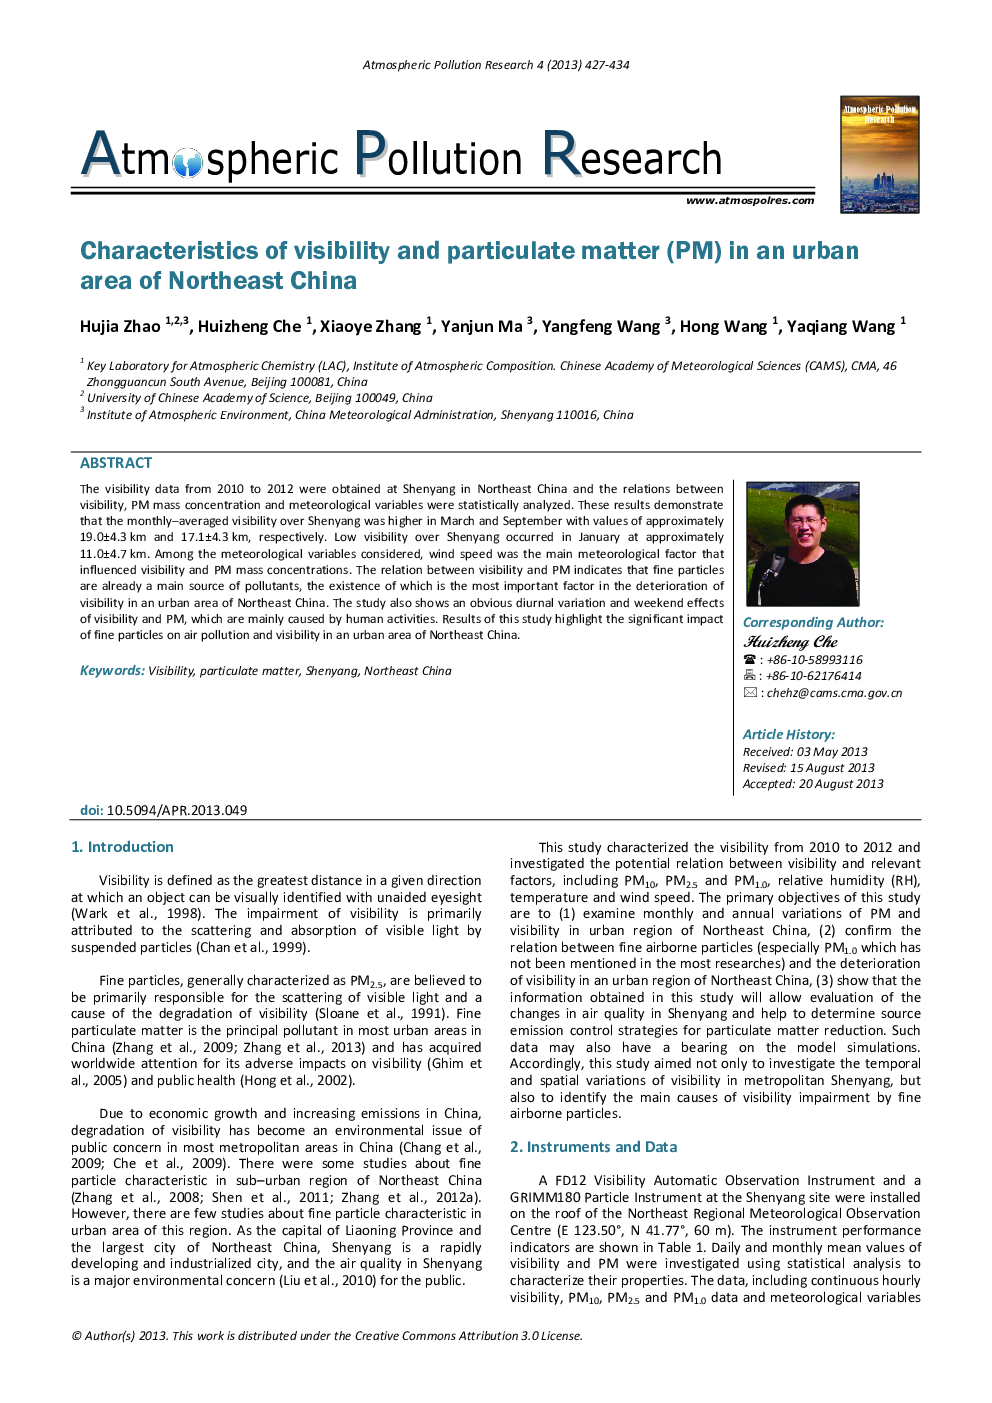 Characteristics of visibility and particulate matter (PM) in an urban area of Northeast China